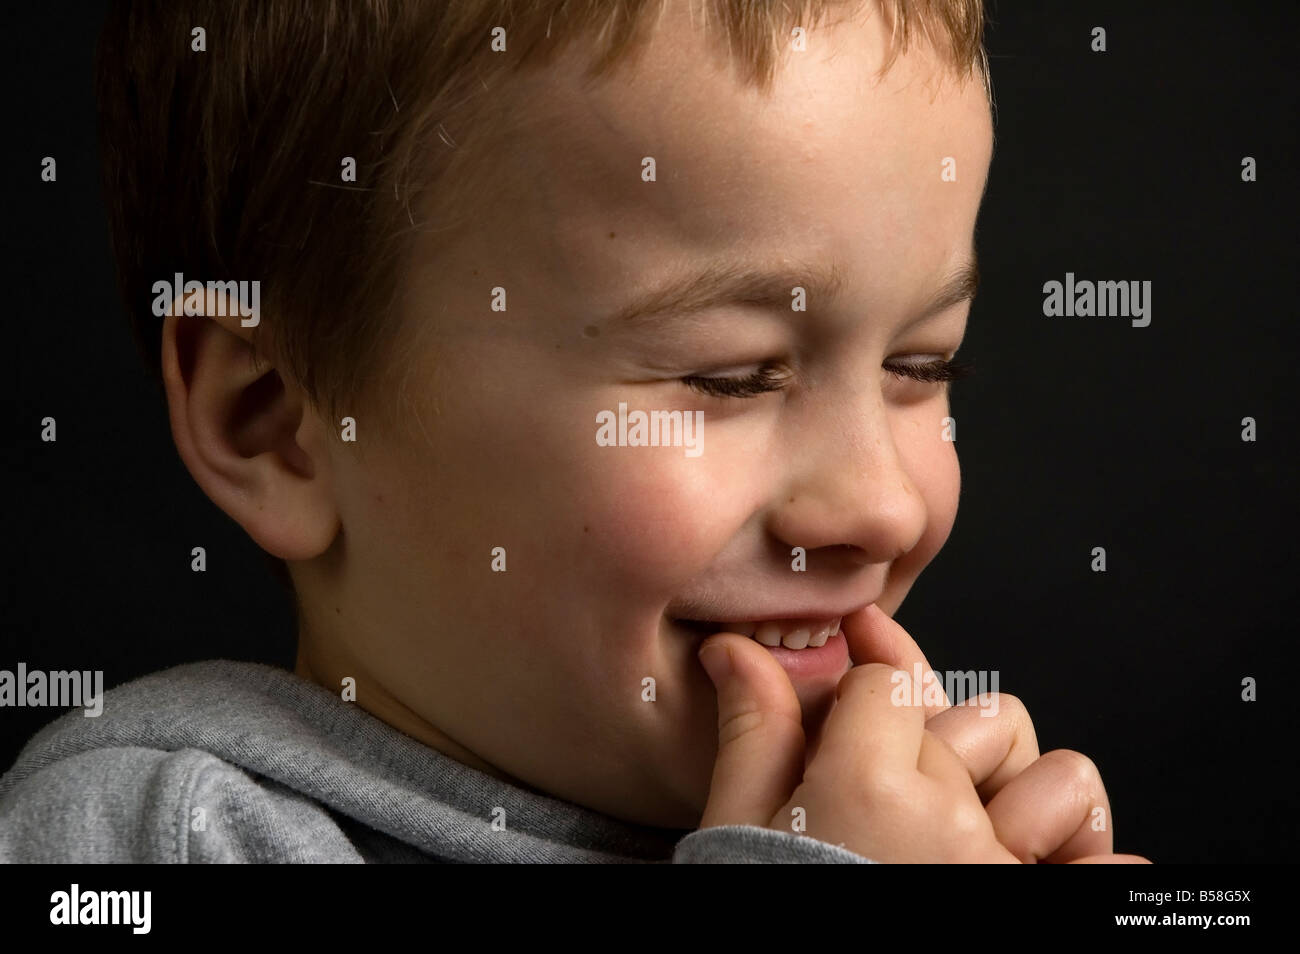 7 Year Old Boy Having Fun Against A Black Background Stock Photo Alamy